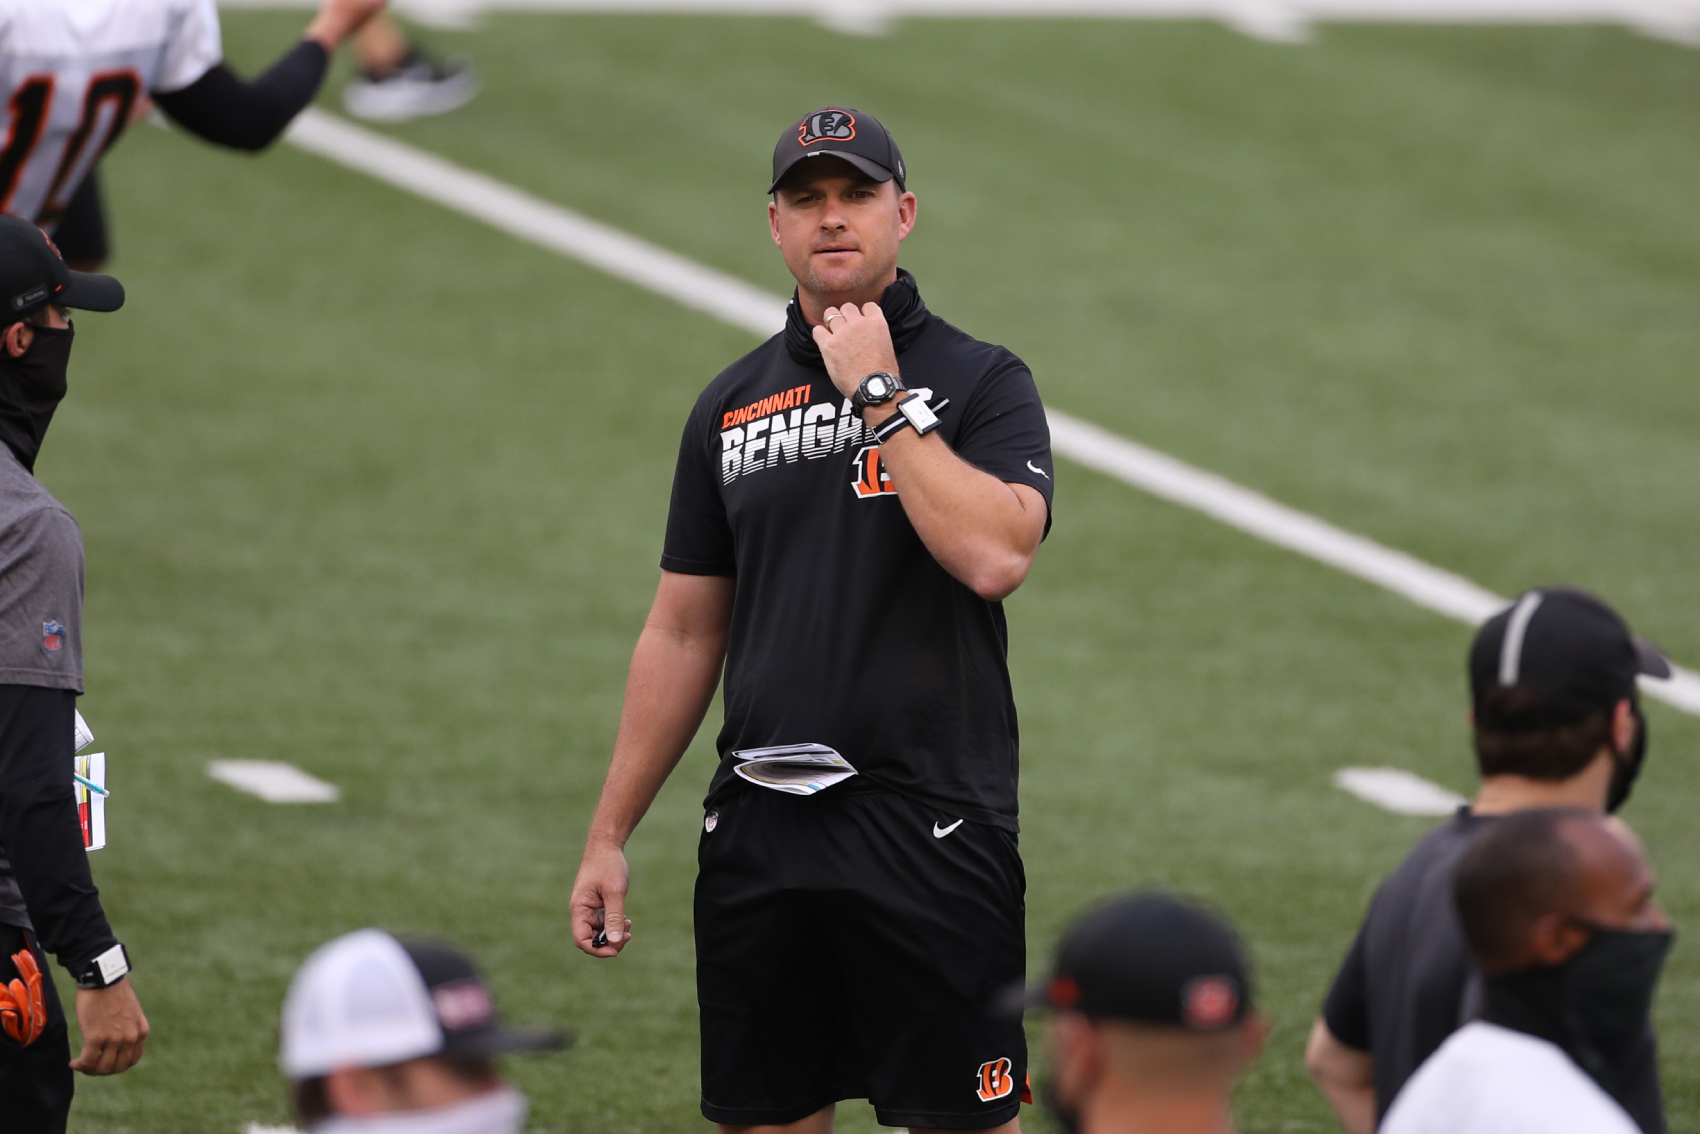 The Cincinnati Bengals have been awful with head coach Zac Taylor. Now, if rumors are true, he should be pretty concerned about his future.